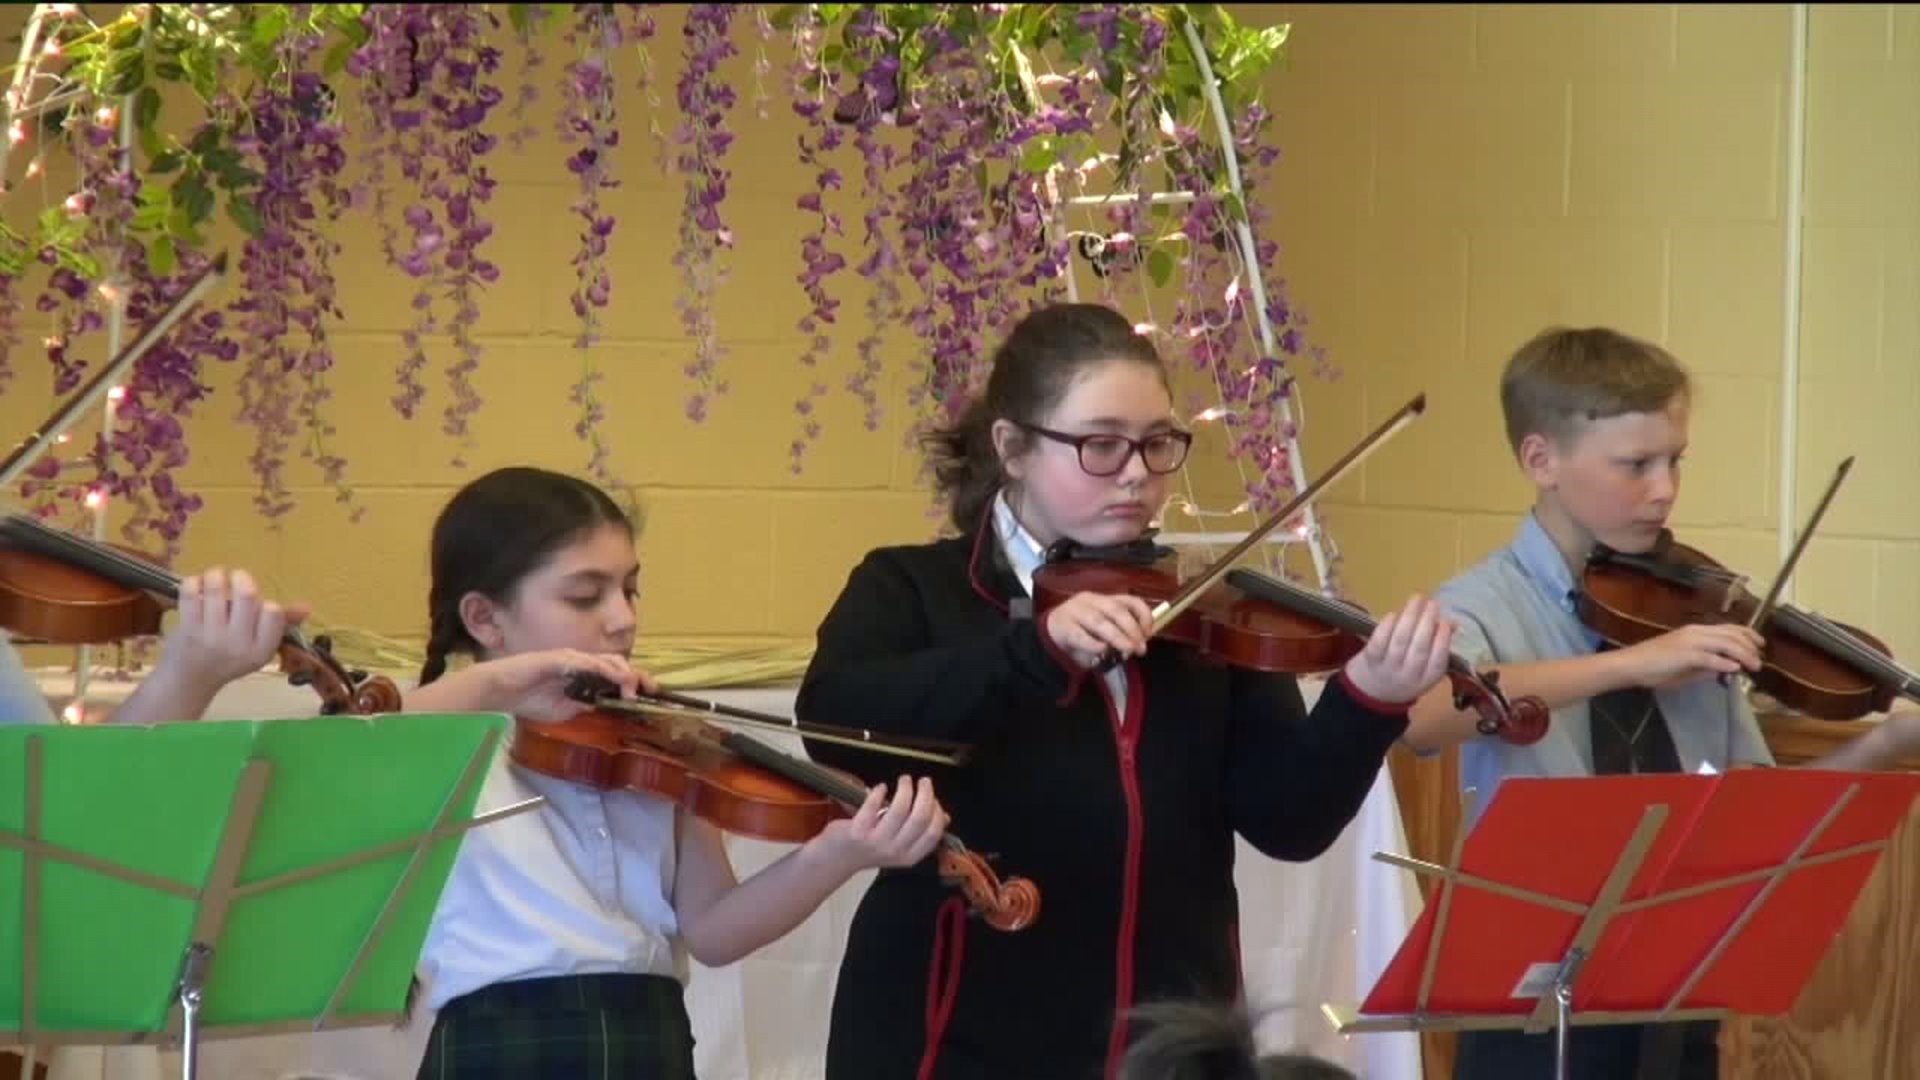 Students Give Violin Performance for Seniors